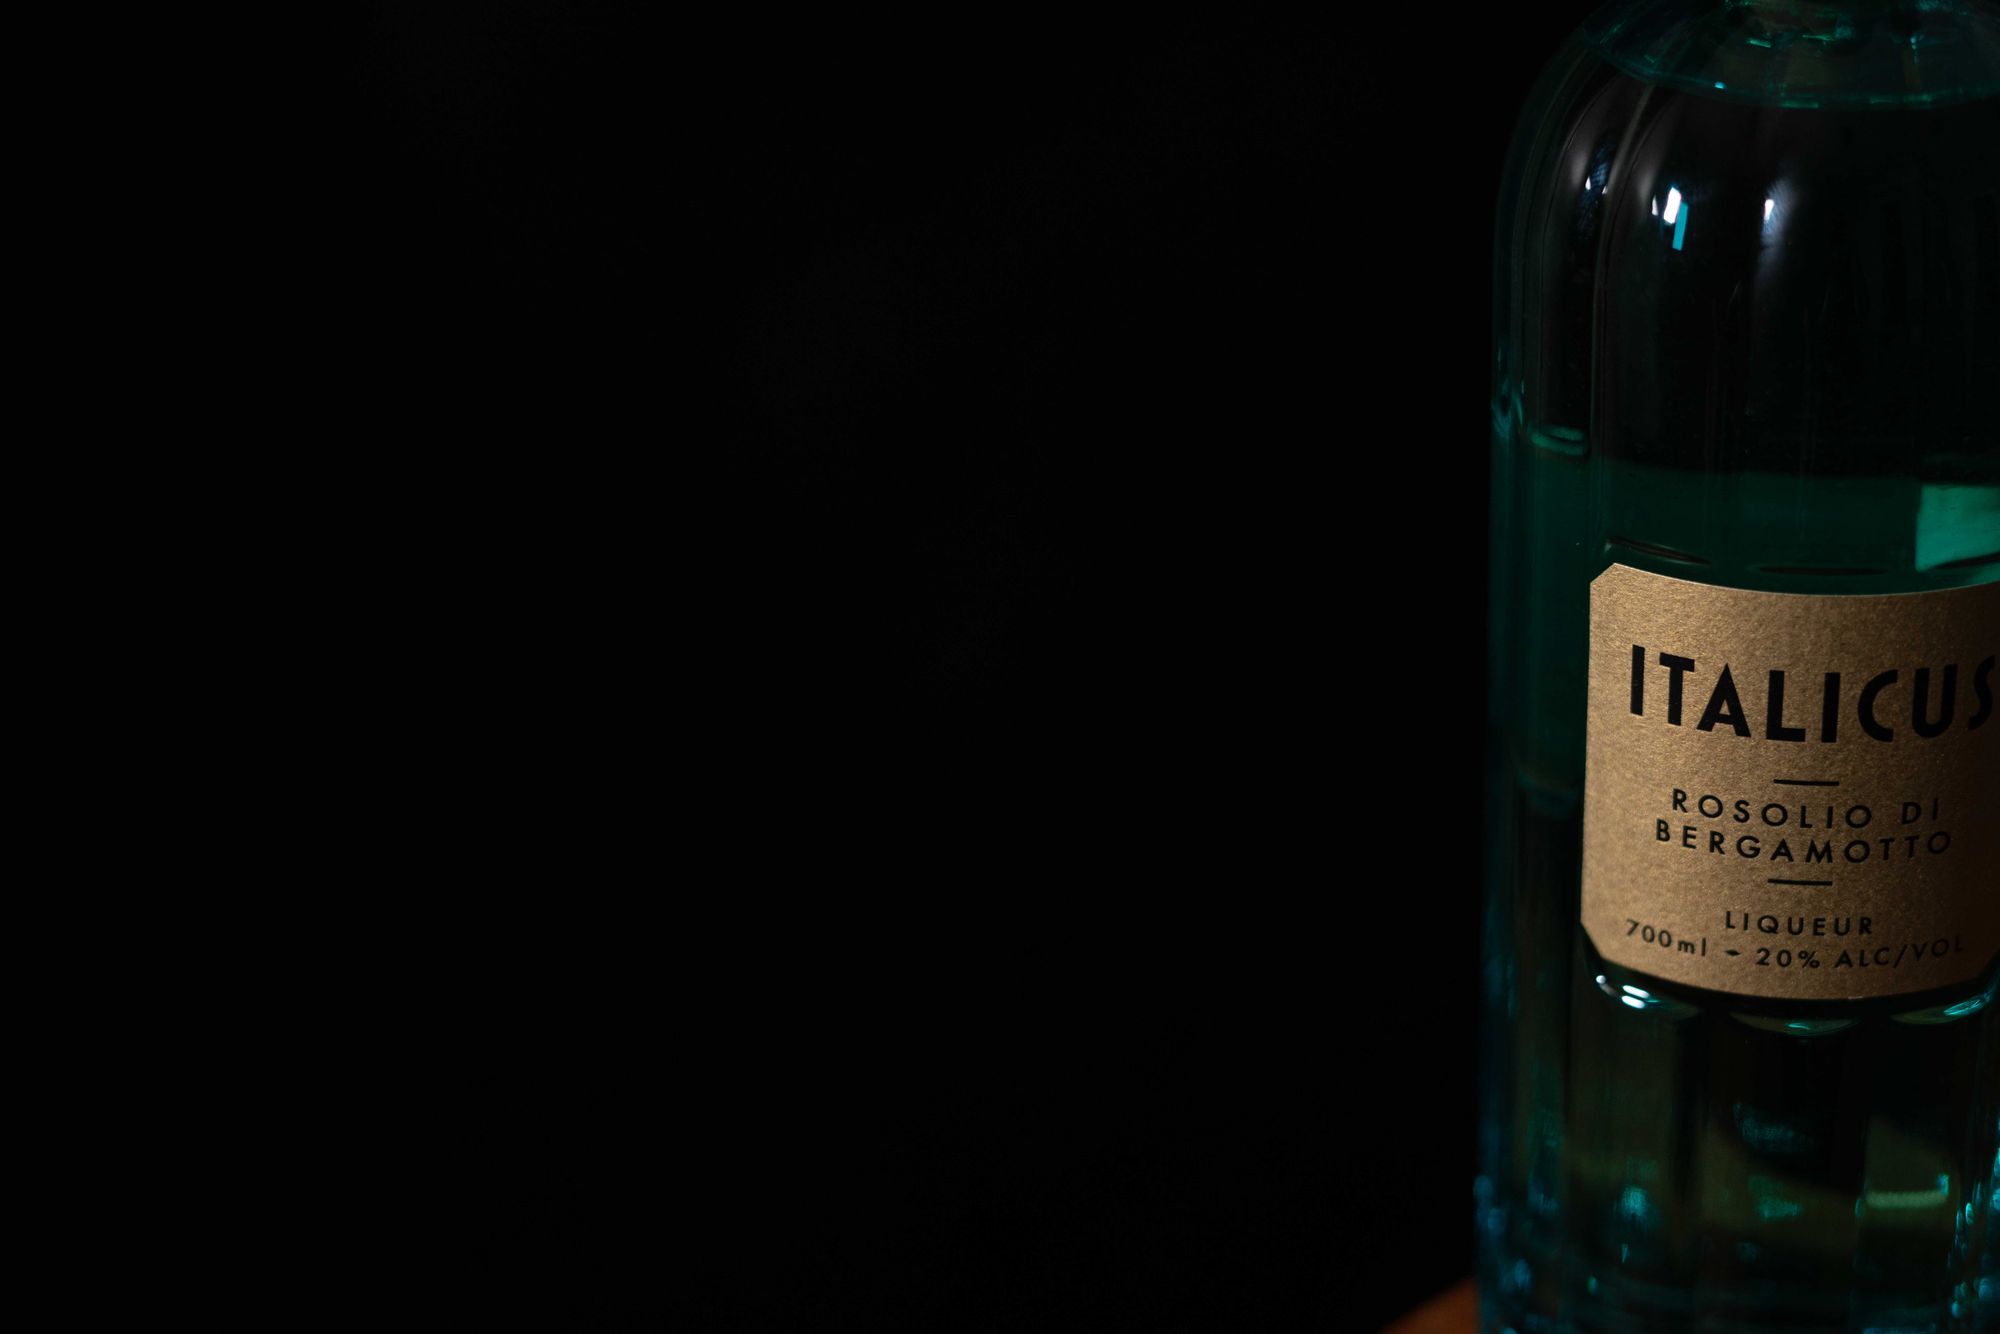 What is you What and know, it how Italicus? need to to use